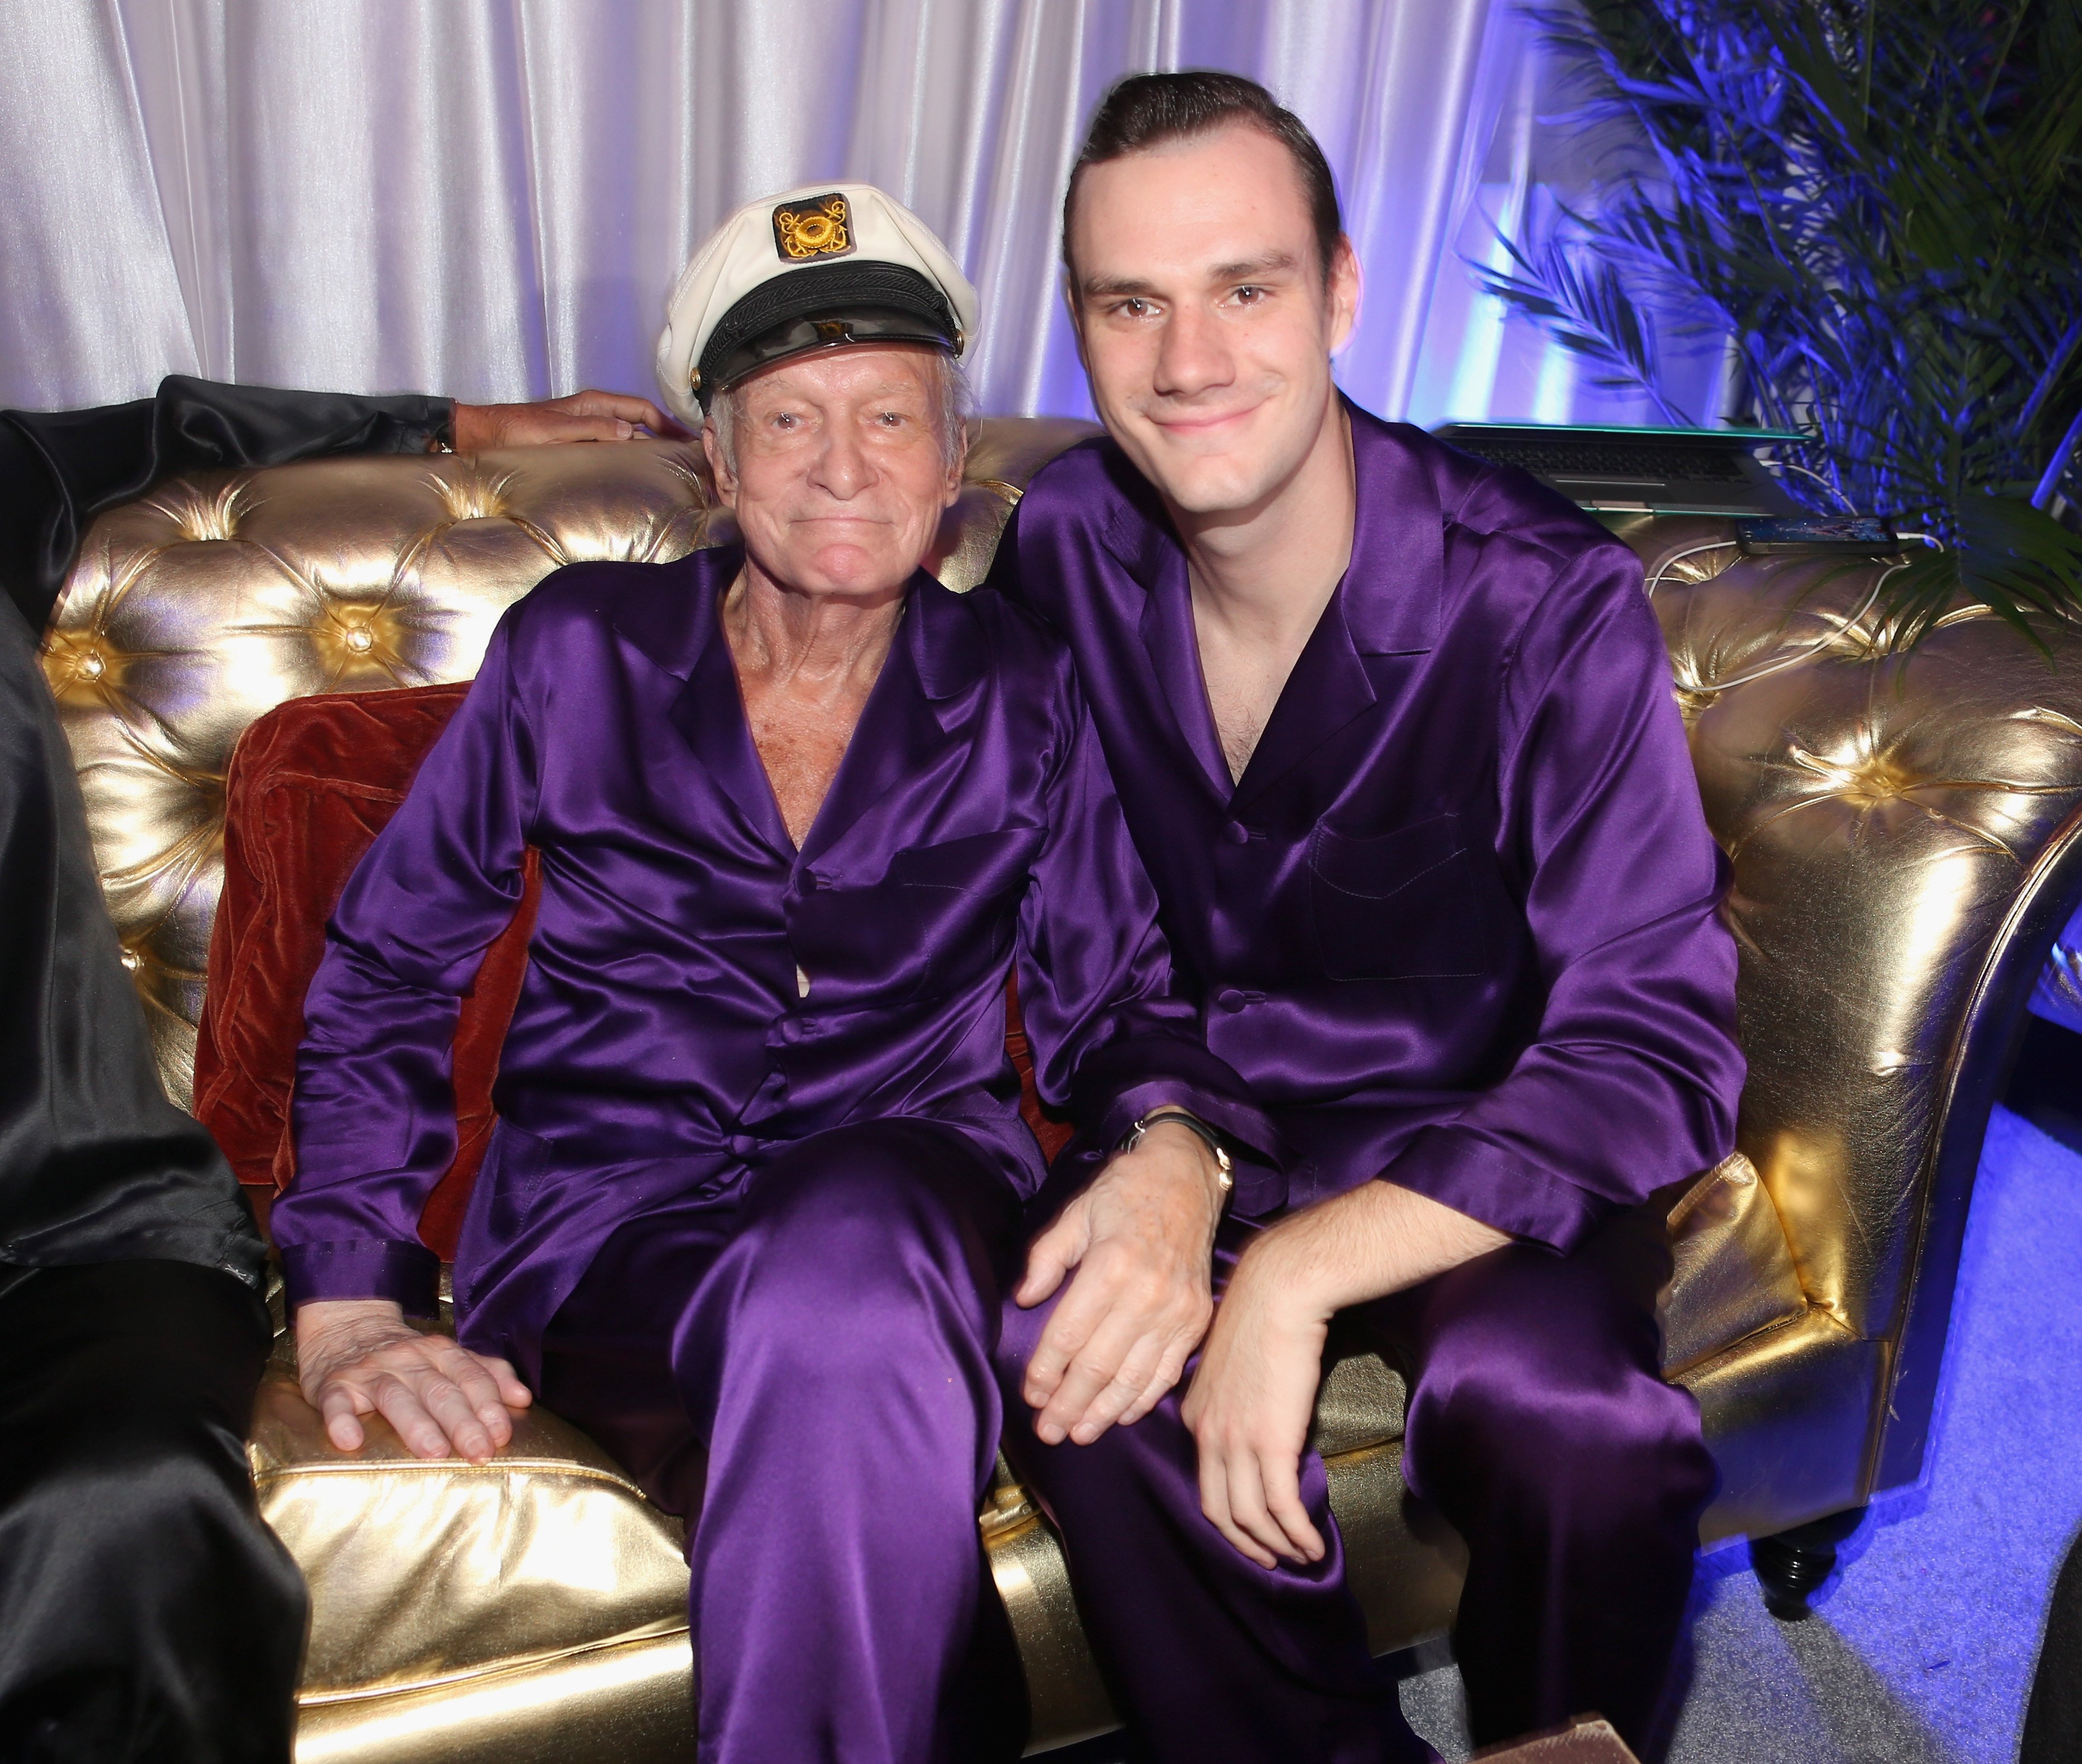 Hugh Hefner and Cooper Hefner attend the Annual Midsummer Night's Dream Party at the Playboy Mansion on August 16, 2014, in Holmby Hills, California. | Source: Getty Images.